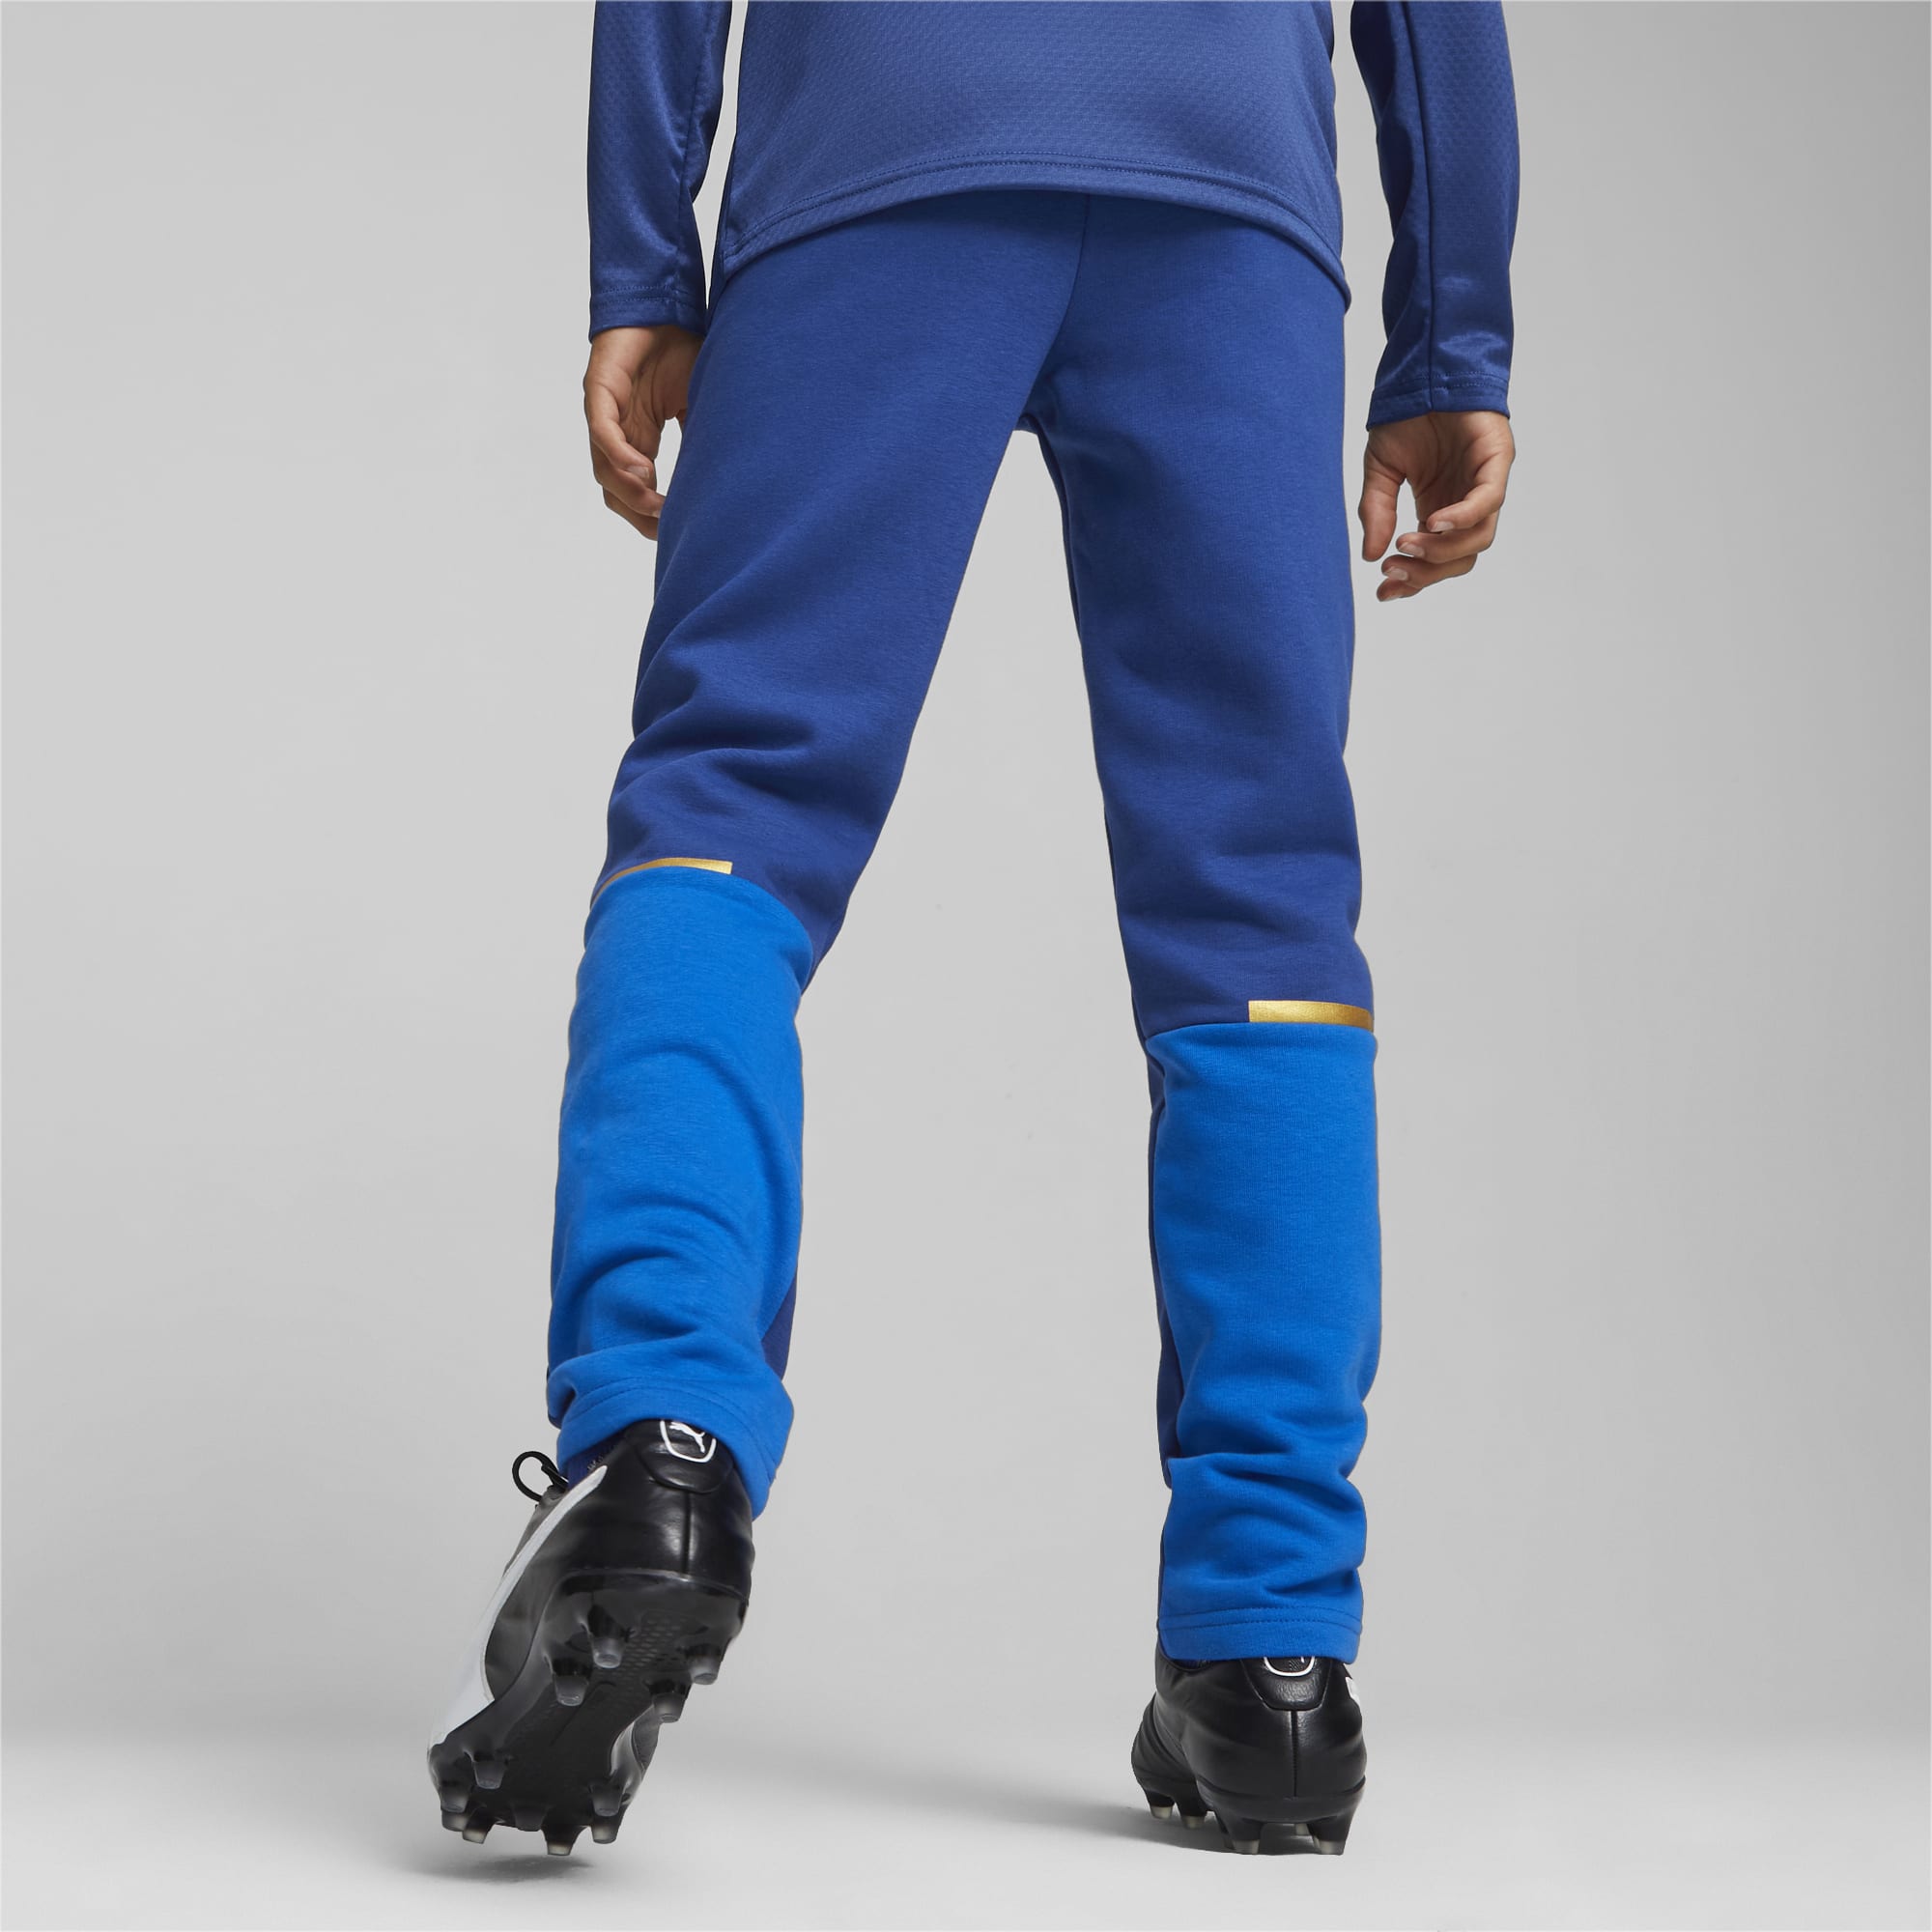 PUMA Olympique De Marseille Football Casuals Youth Sweatpants, Royal Blue, Size 110, Accessories